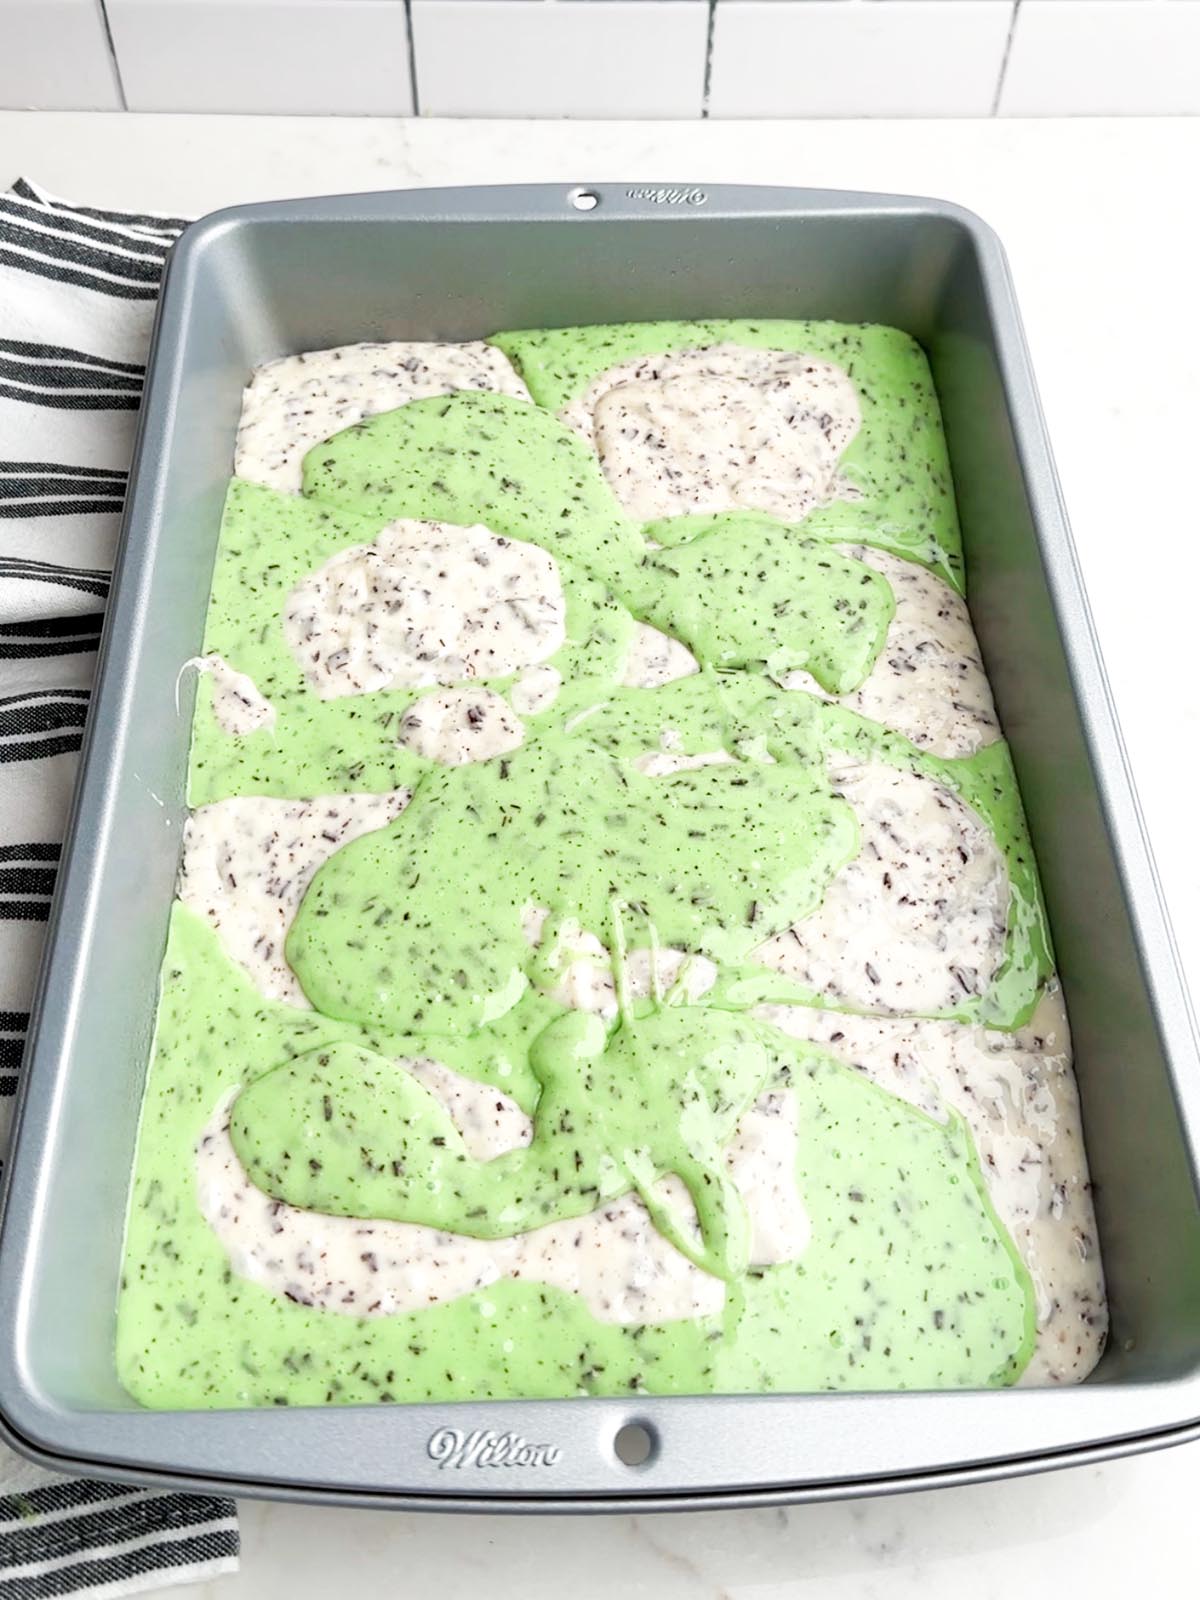 white and green cake batter in a cake pan